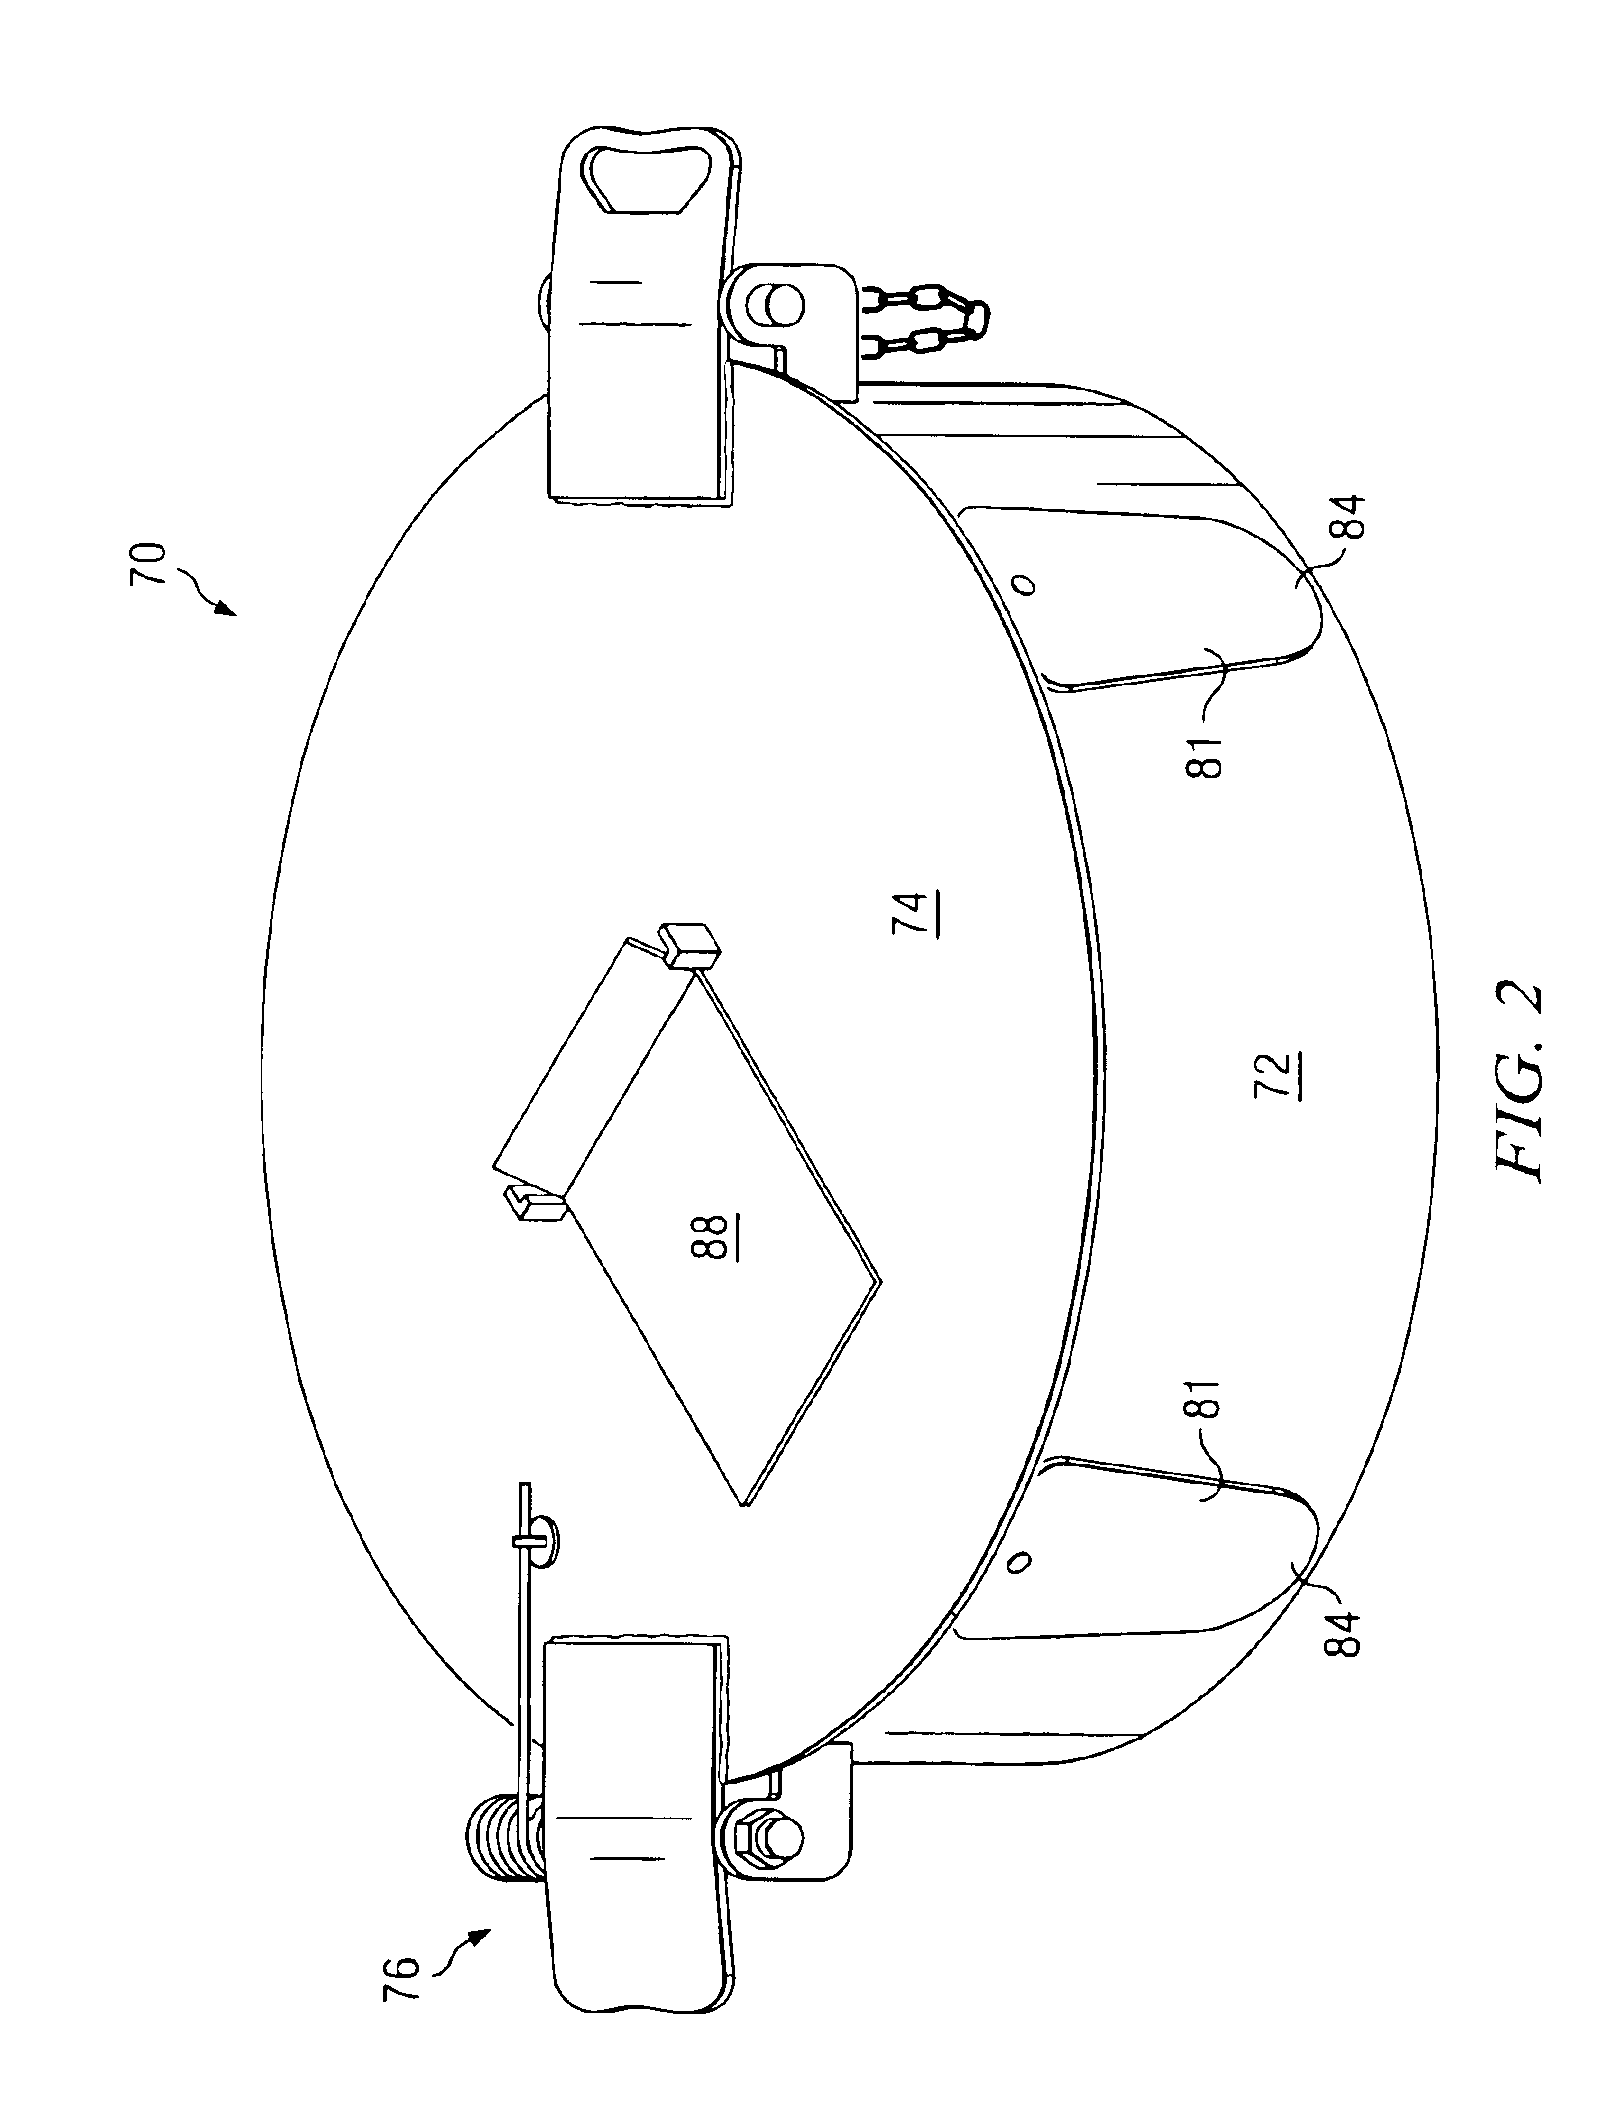 Security device and method to prevent unauthorized discharge of contents from a tank